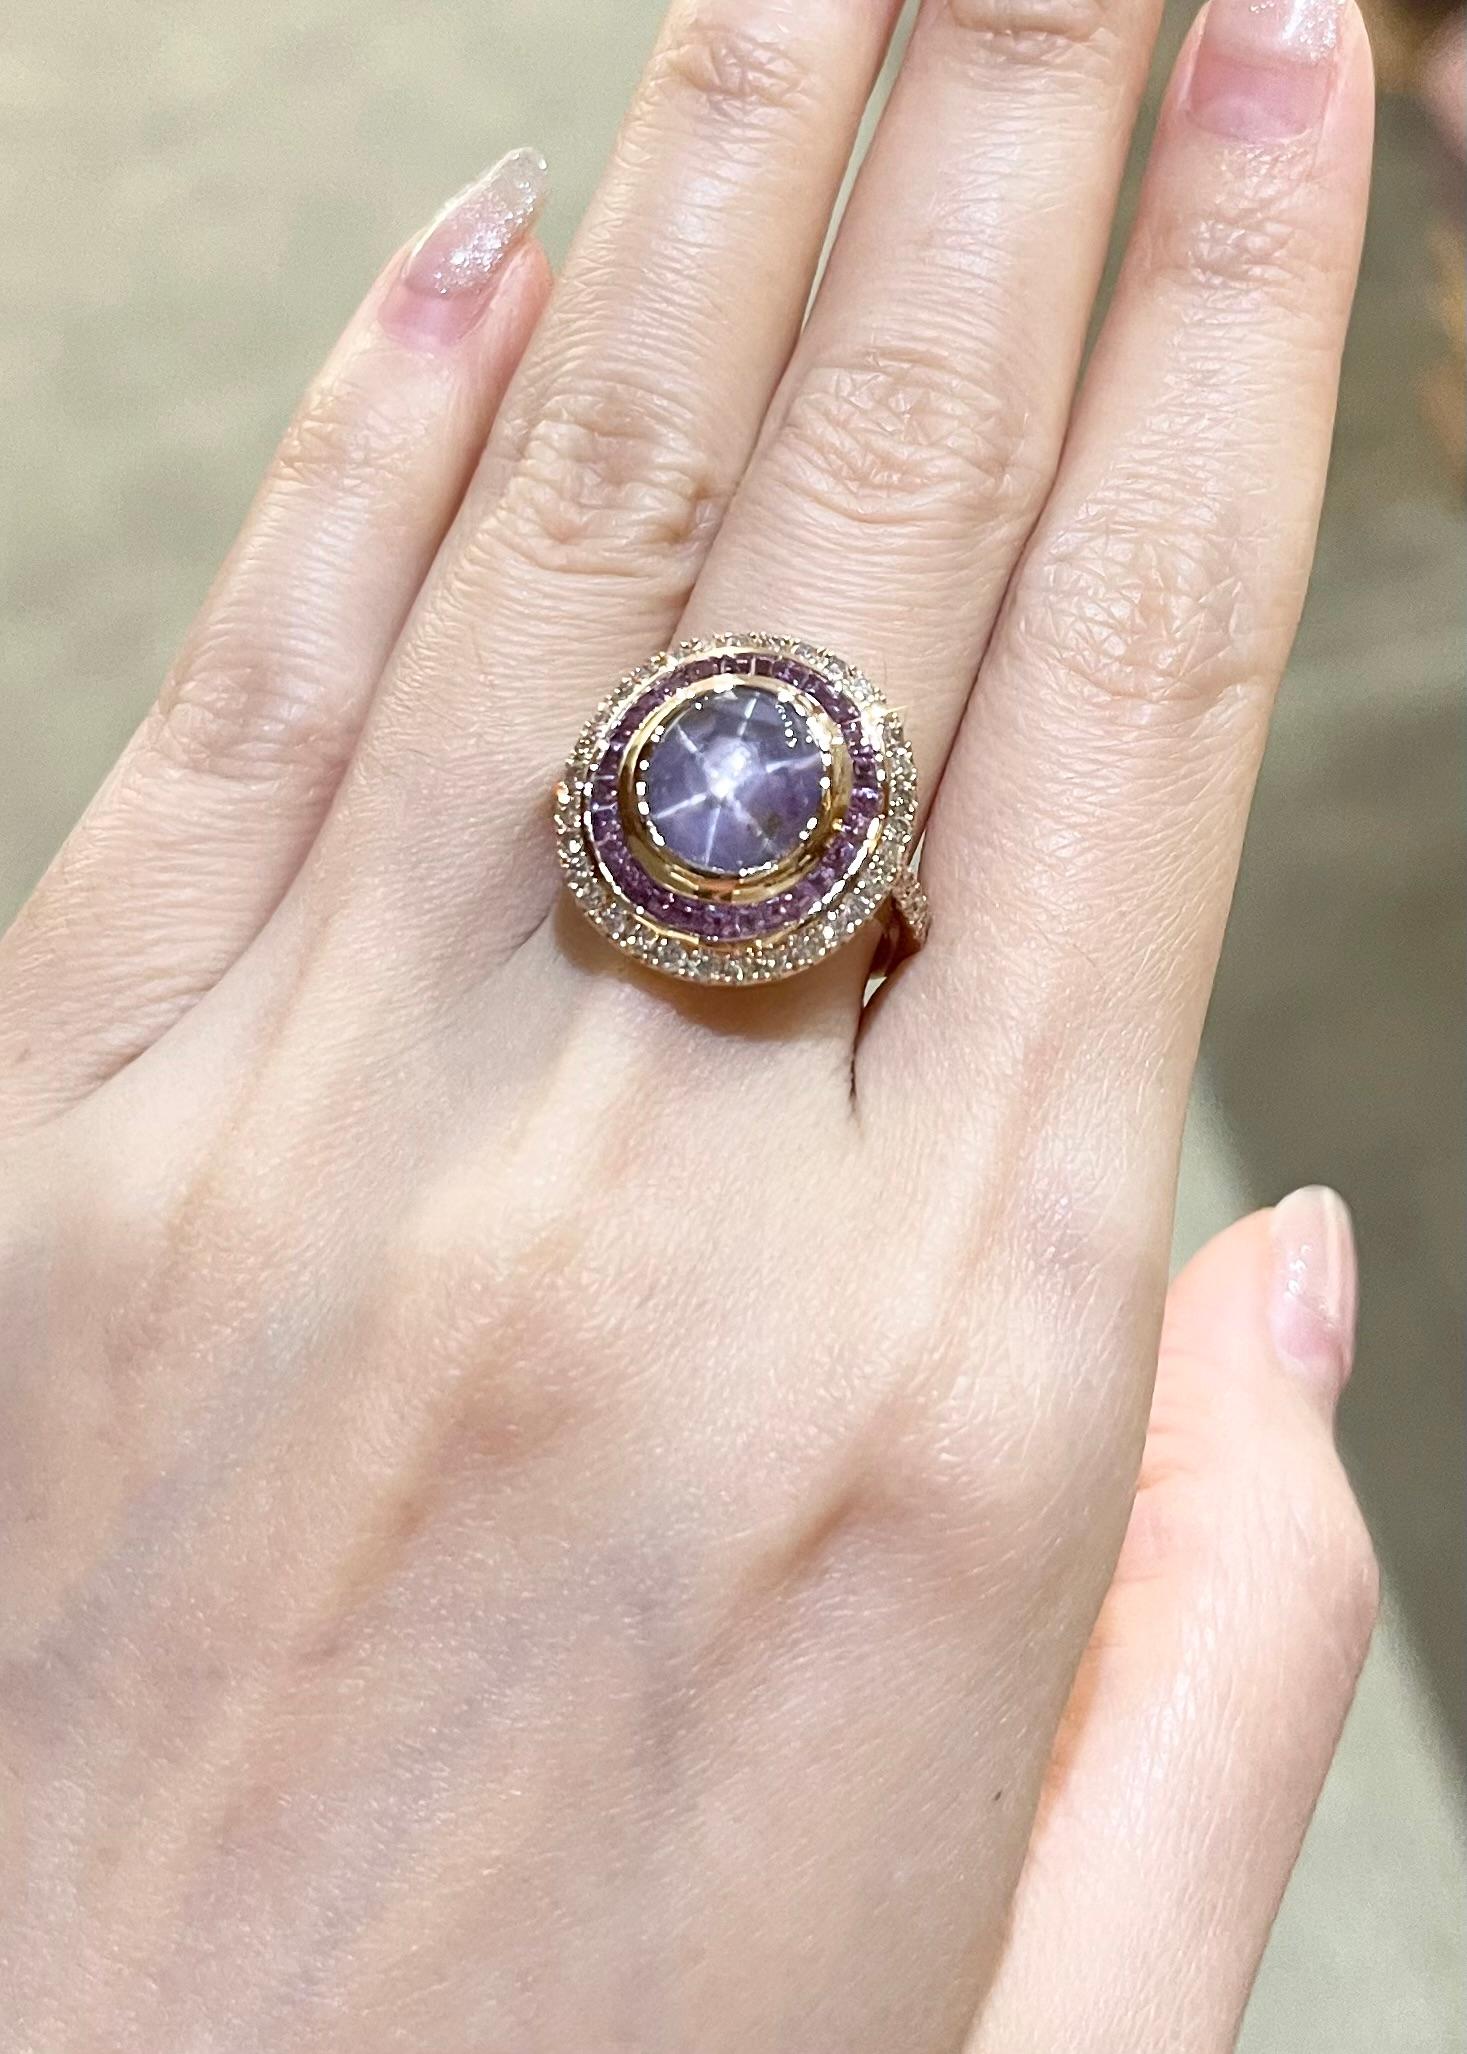 Purple Star Sapphire 5.49 carats, Purple Sapphire 2.24 carats and Brown Diamond 0.75 carats Ring set in 18K Rose Gold Settings

Width:  1.8 cm 
Length: 1.9 cm
Ring Size: 53
Total Weight: 10.25 grams

